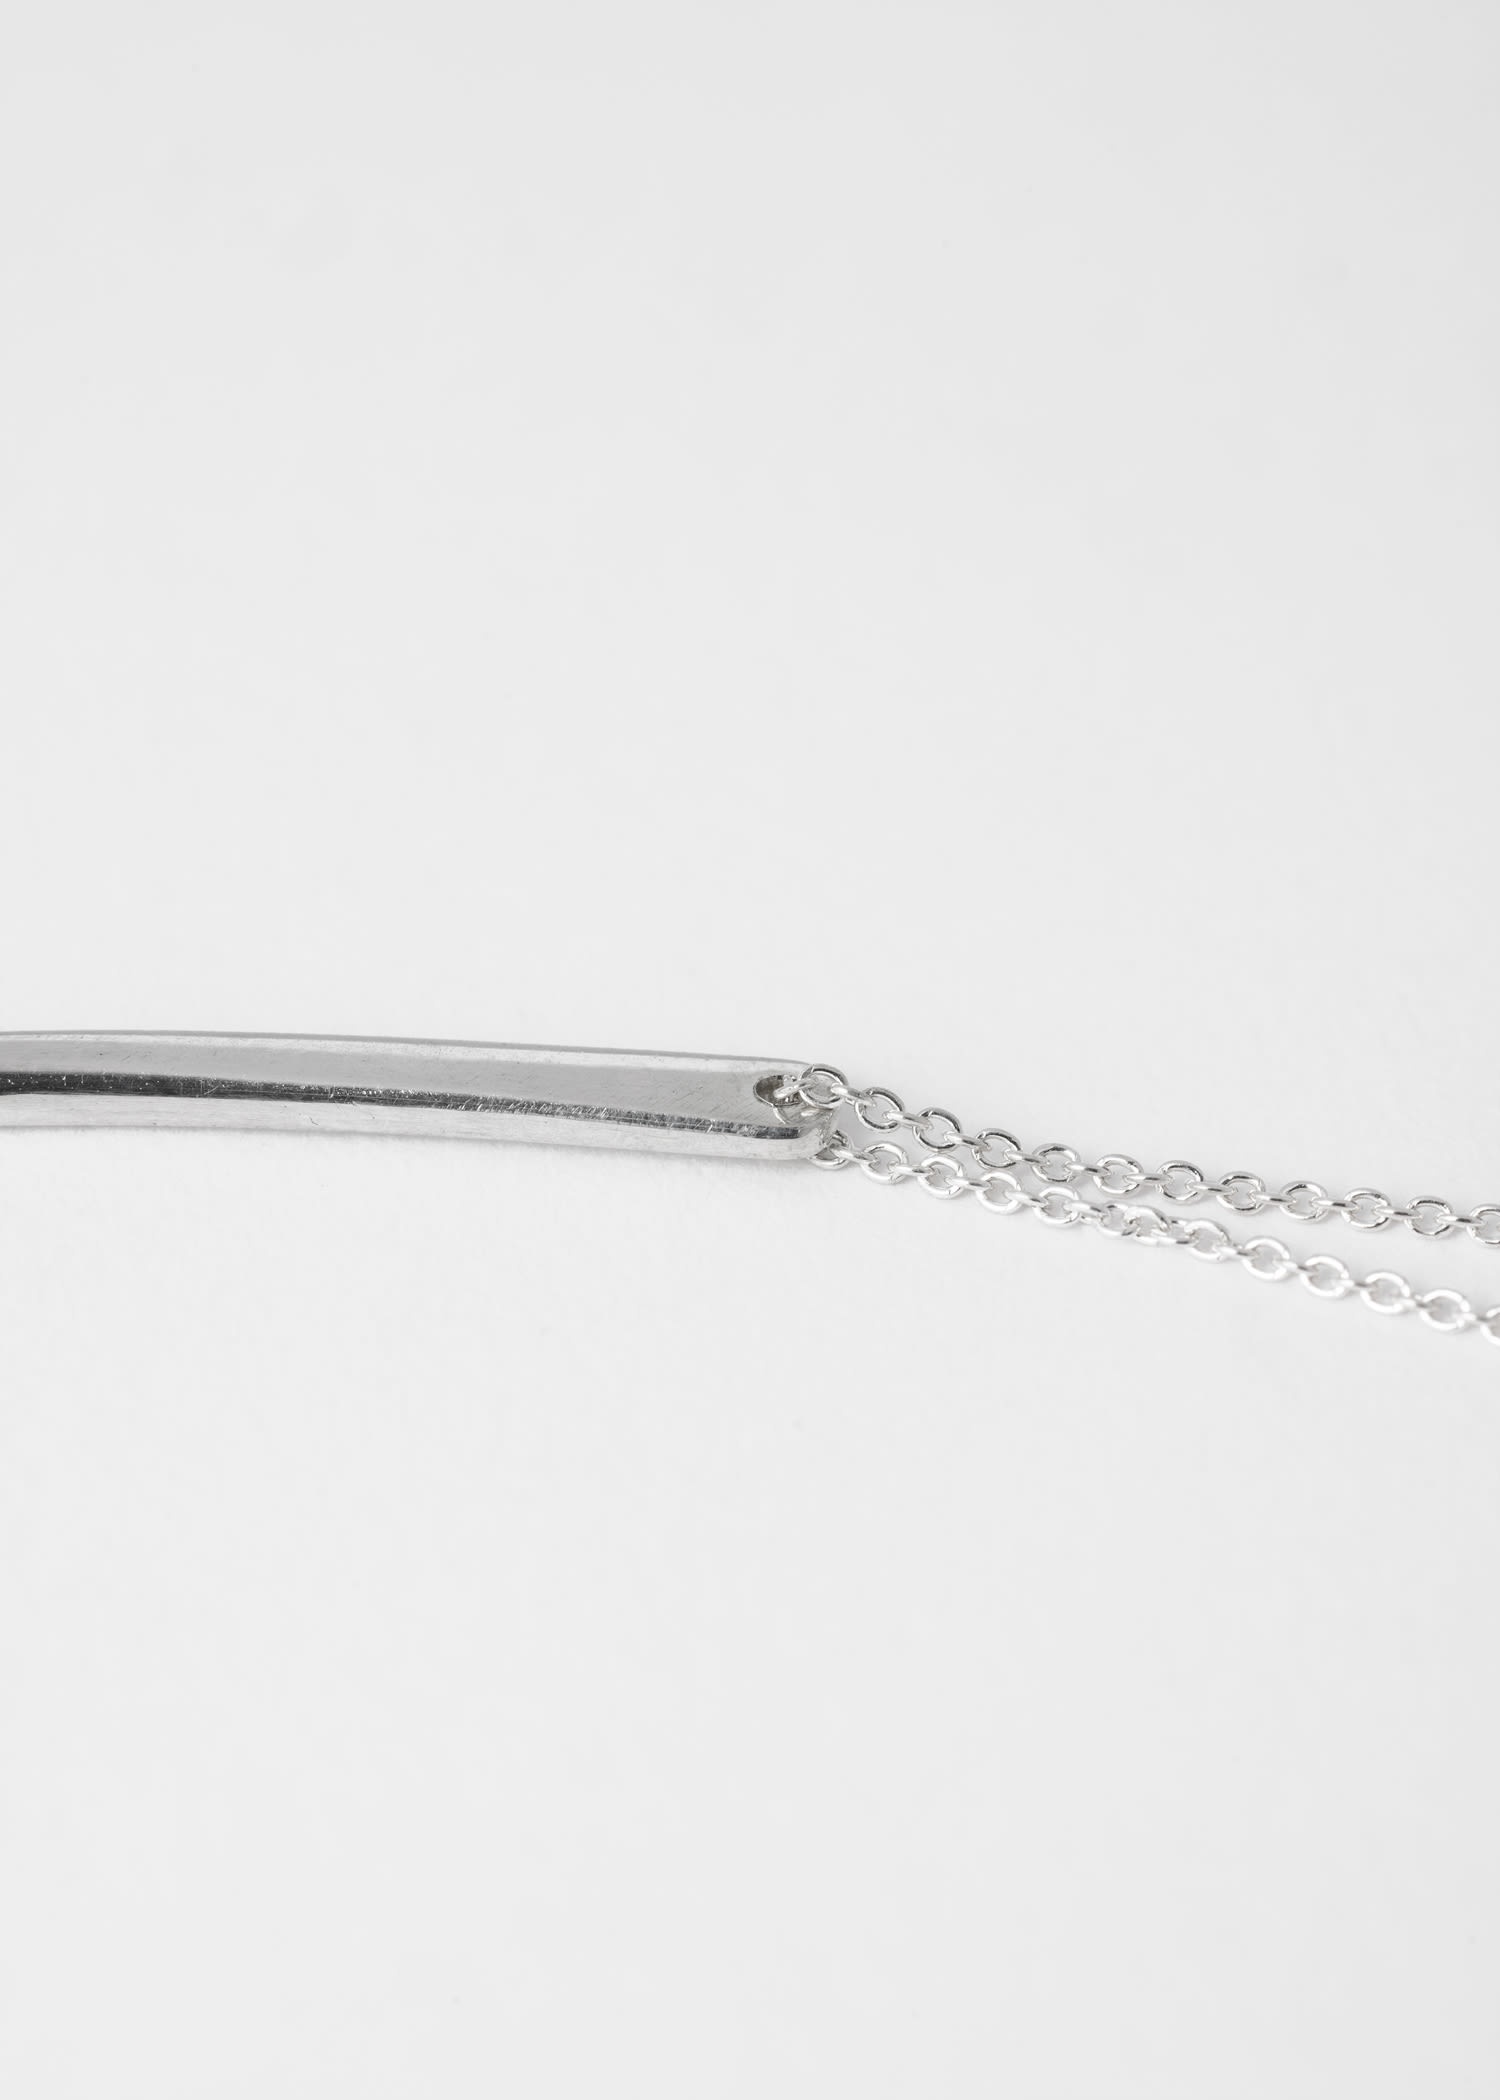 'Ayla Curve' Silver Fine Chain Necklace by Helena Rohner - 4